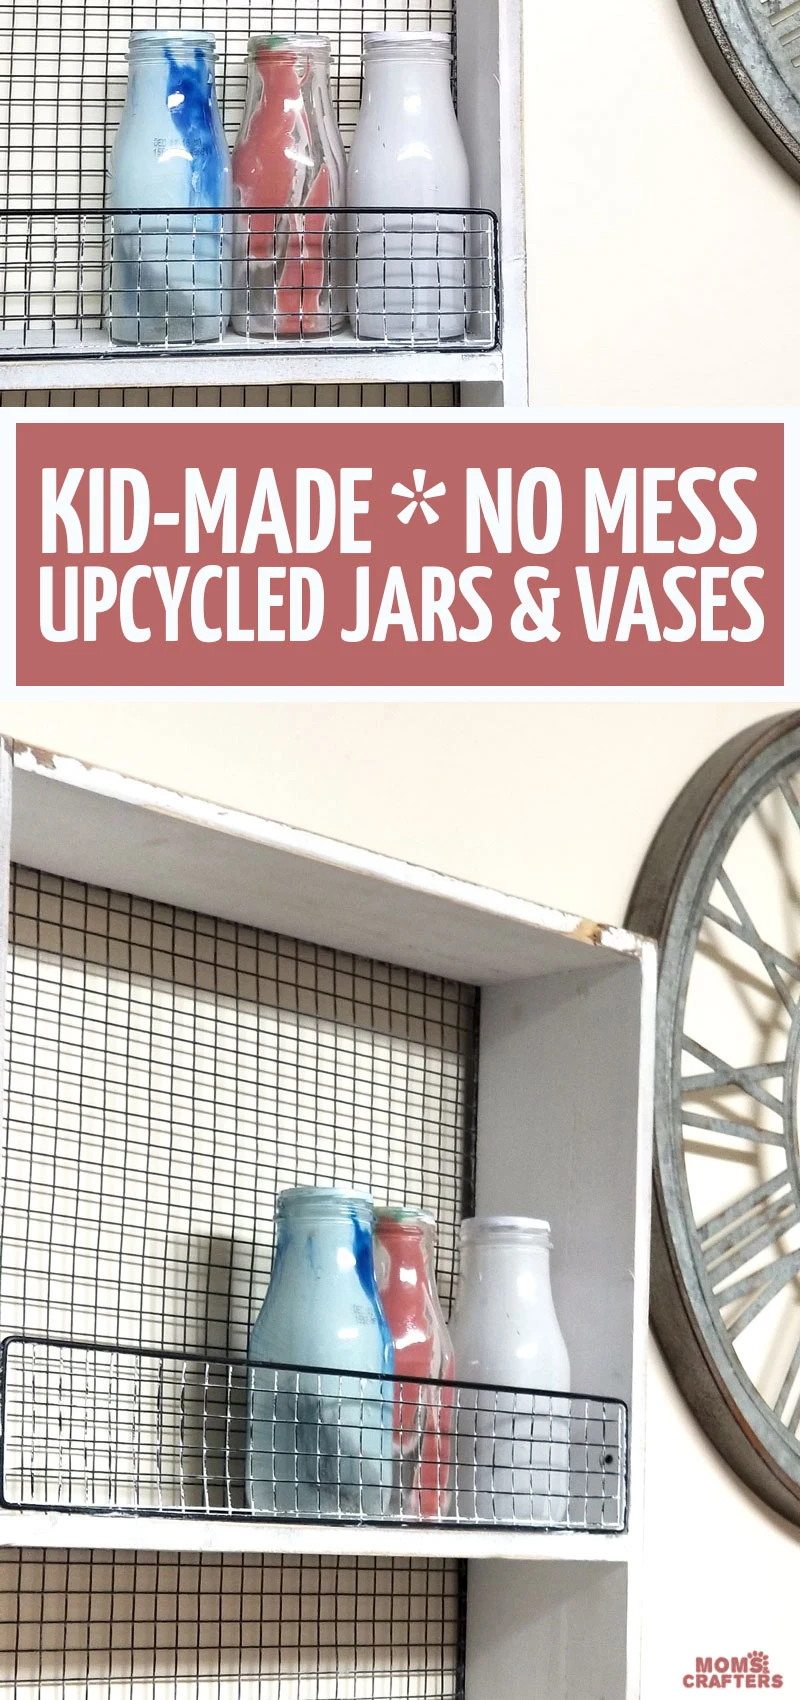 Looking for Frappuccino bottle crafts? These beautiful pour painted upcycled vases are super easy to make - and are a great kid-made gifts for toddlers, preschoolers, teens, tweens and grown ups to make for moms for mothers day or any occasion! Reuse Starbucks bottles as milk bottle displays. 